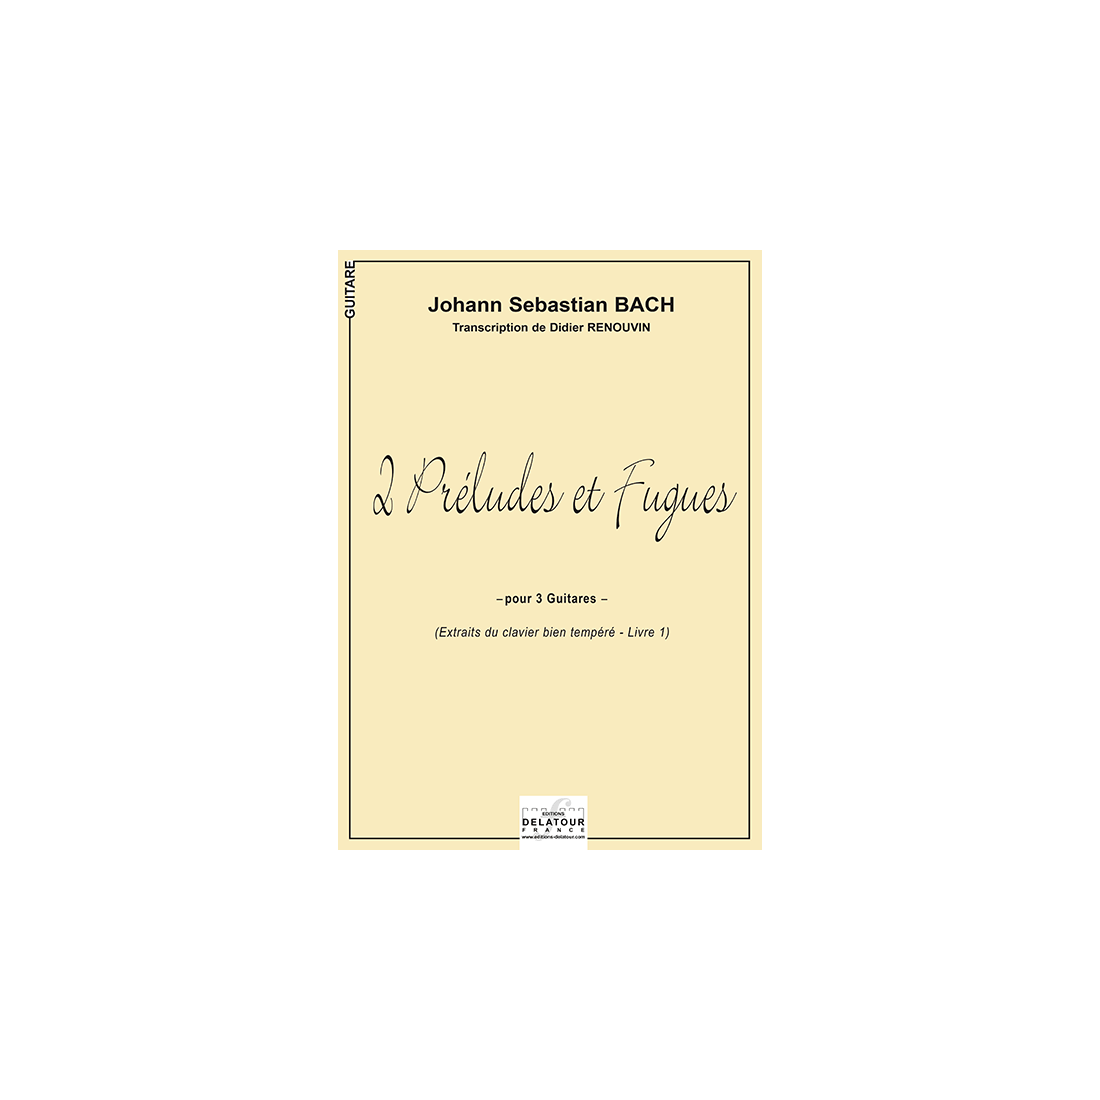 2 Preludes and Fugues for 3 guitars from the Well-Tempered Clavier Book 1